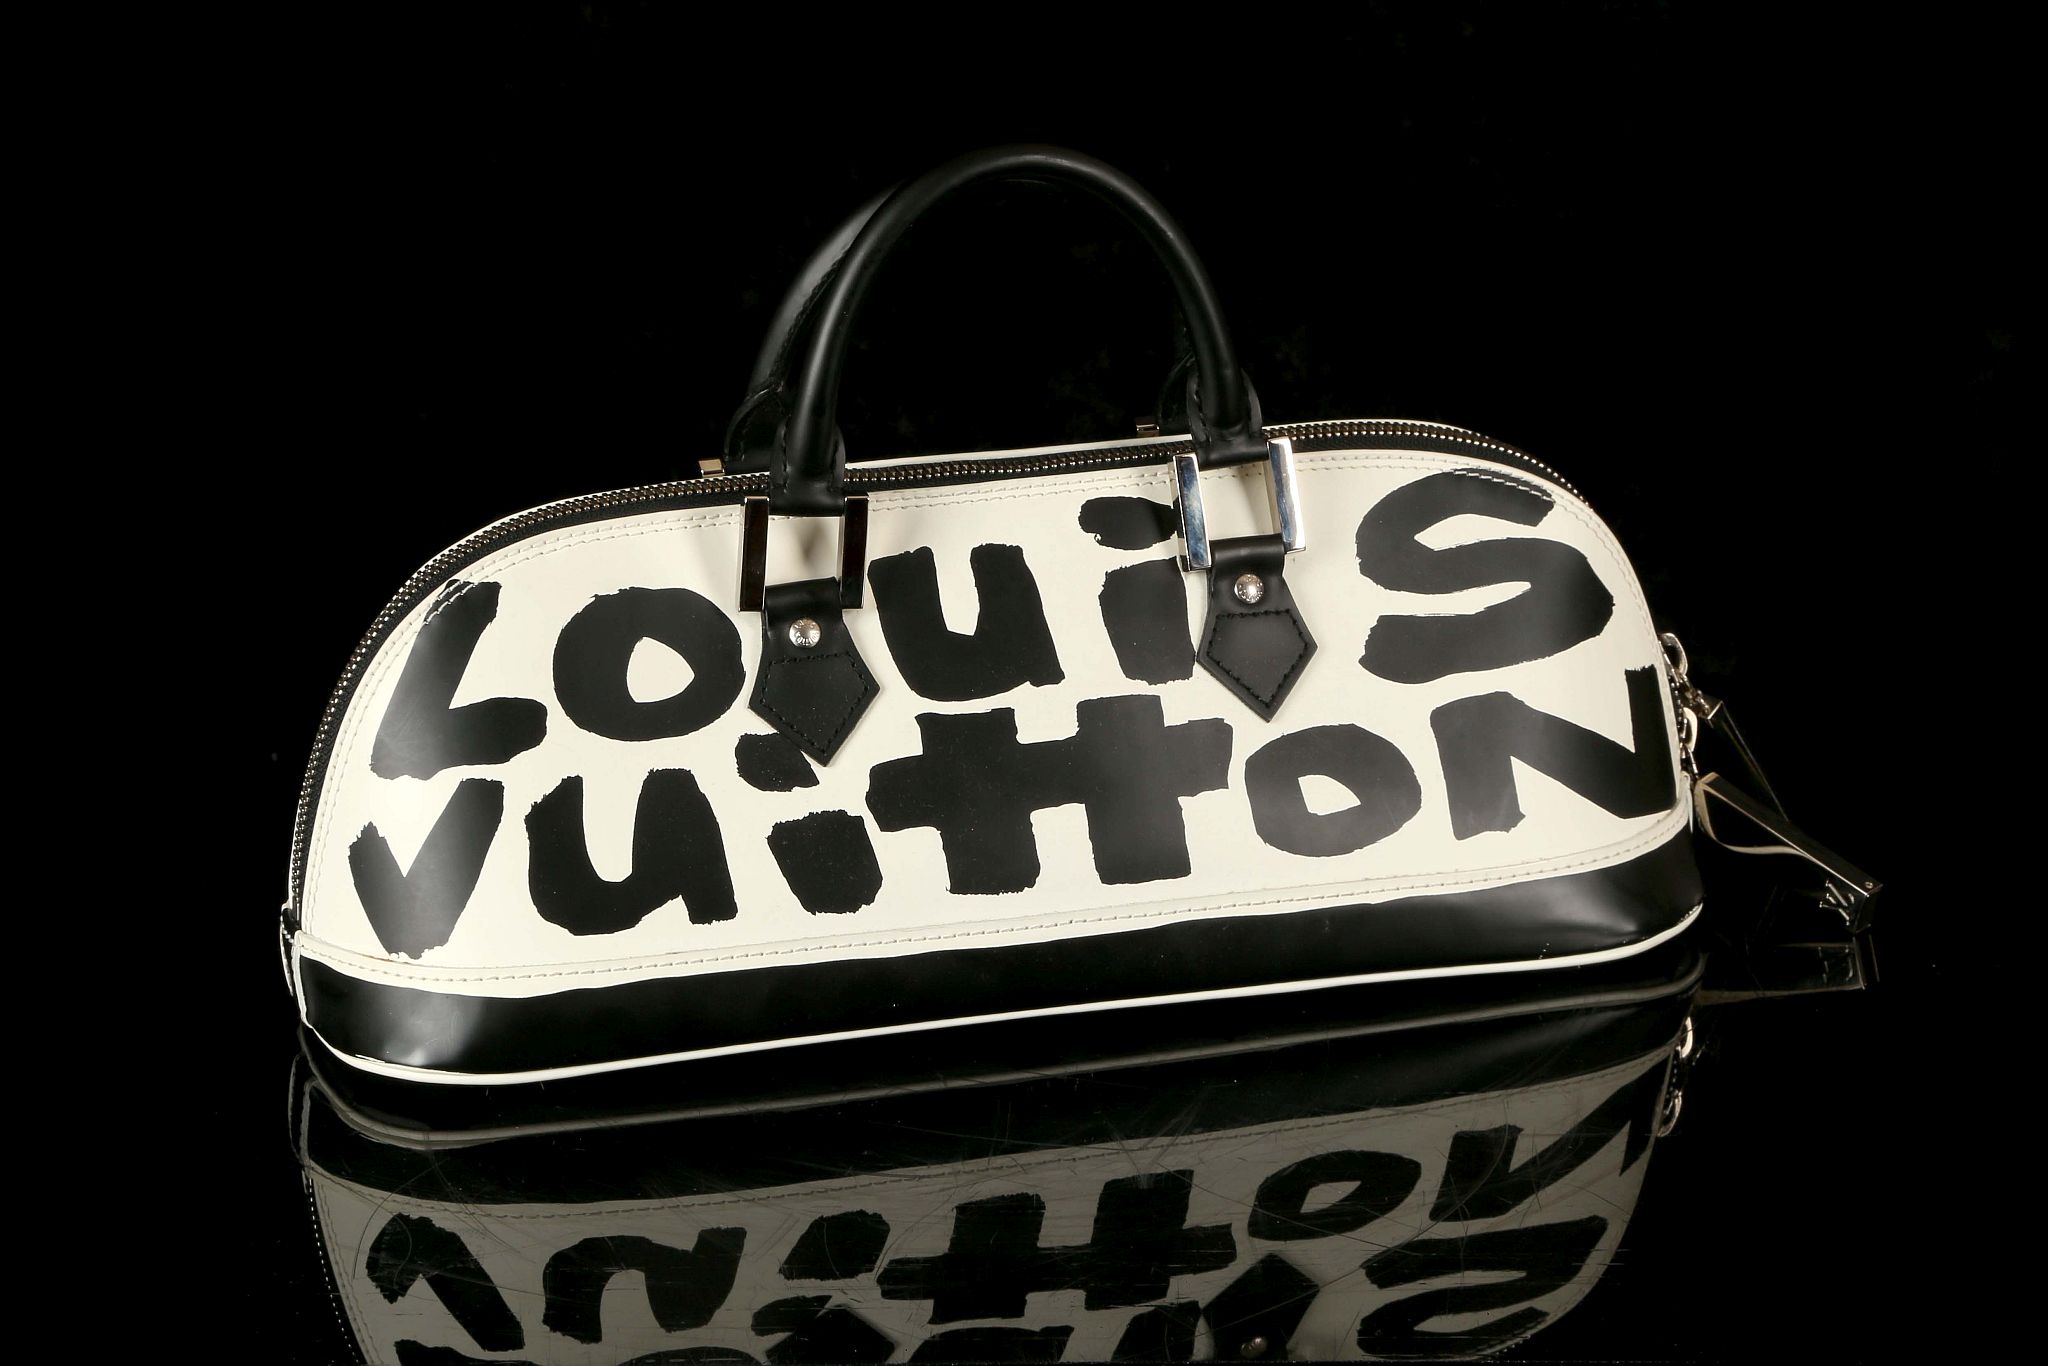 LOUIS VUITTON STEPHEN SPROUSE EAST/WEST ALMA BAG, date code for 2001, black and white graffiti